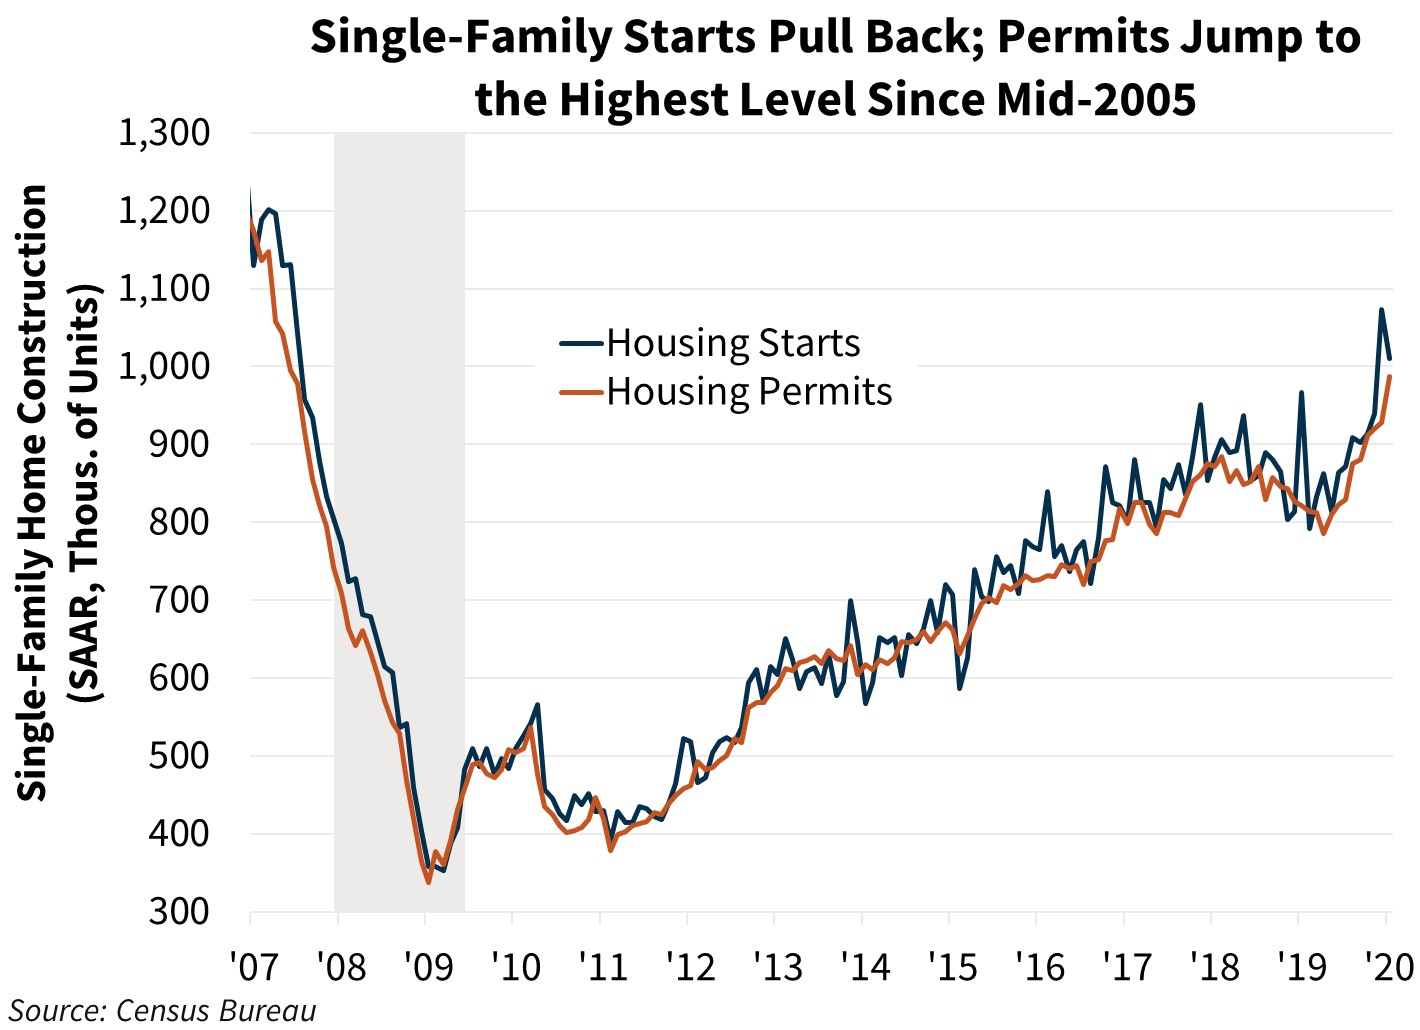 Single-Family Starts Pull Back; Permits Jump to The Highest Level Since Mid-2005